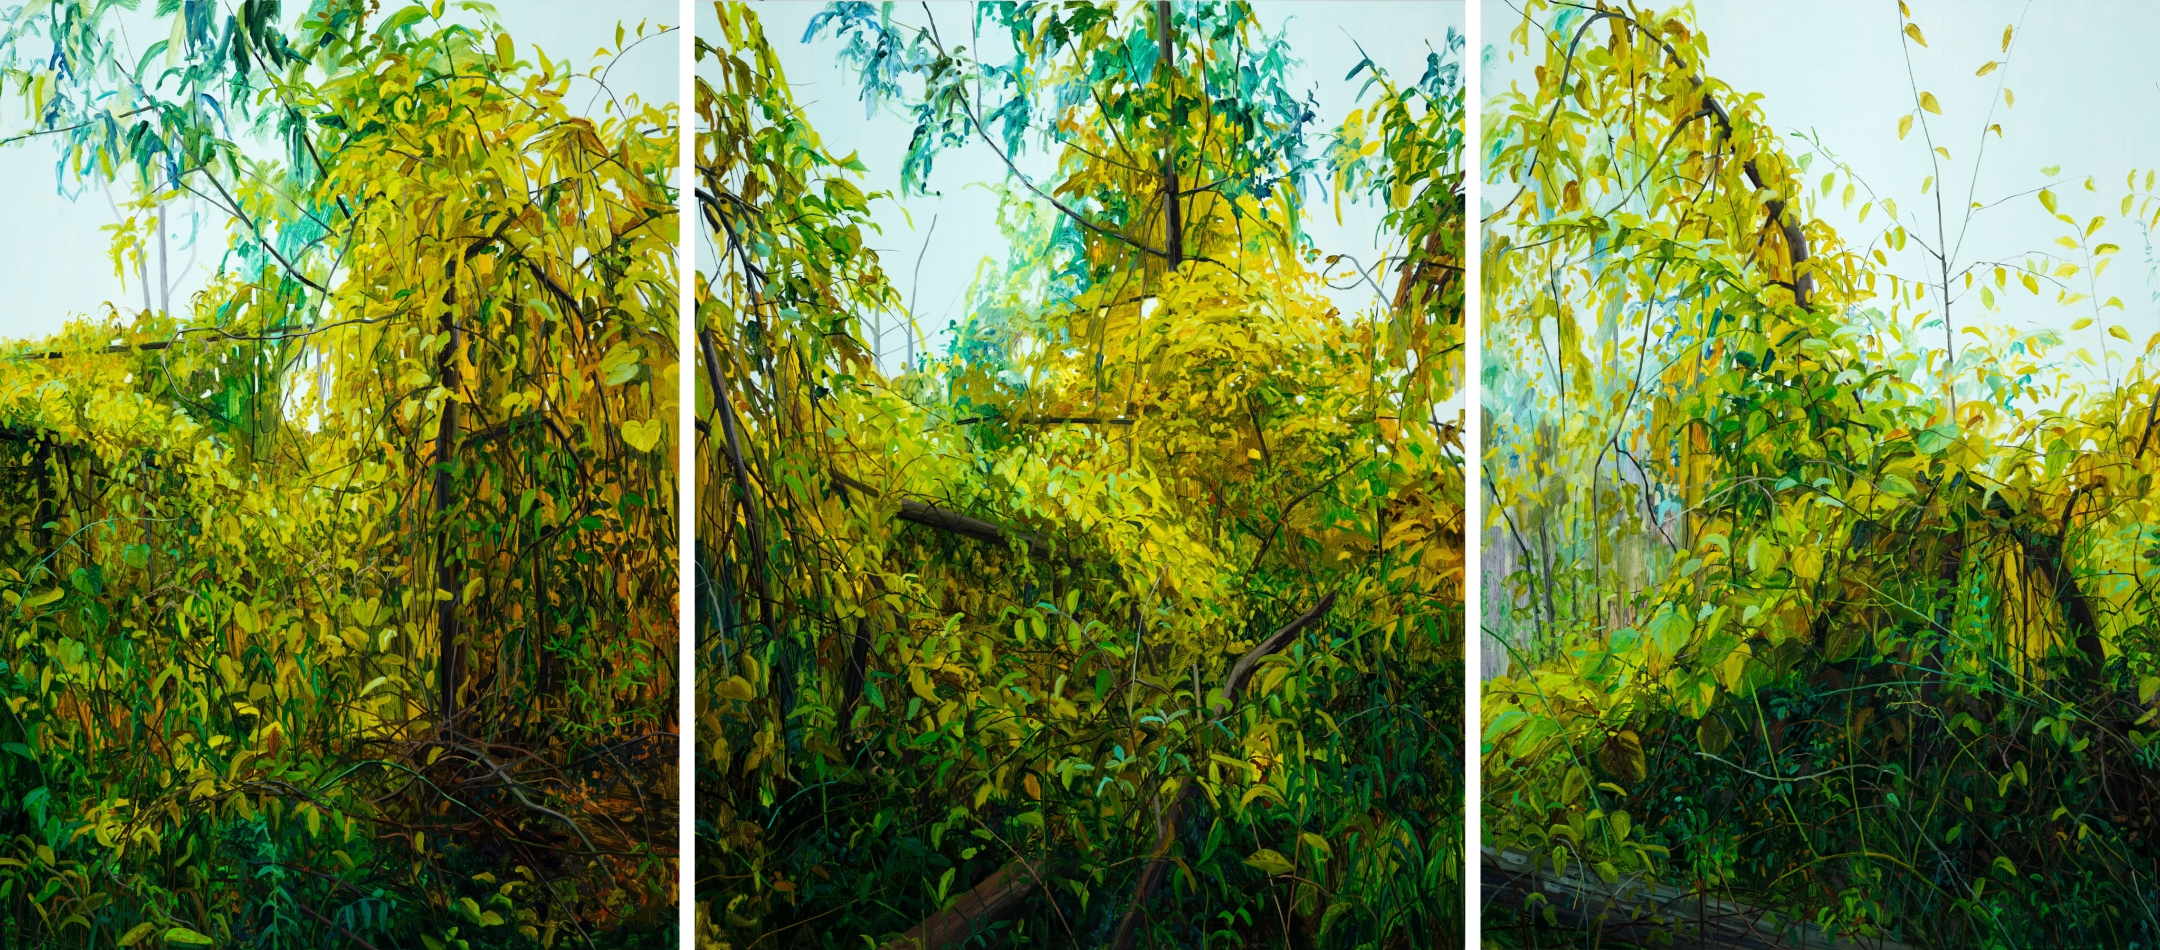 Claire Sherman, Trees and Vines, 2021. Oil on canvas, 96 x 234 inches